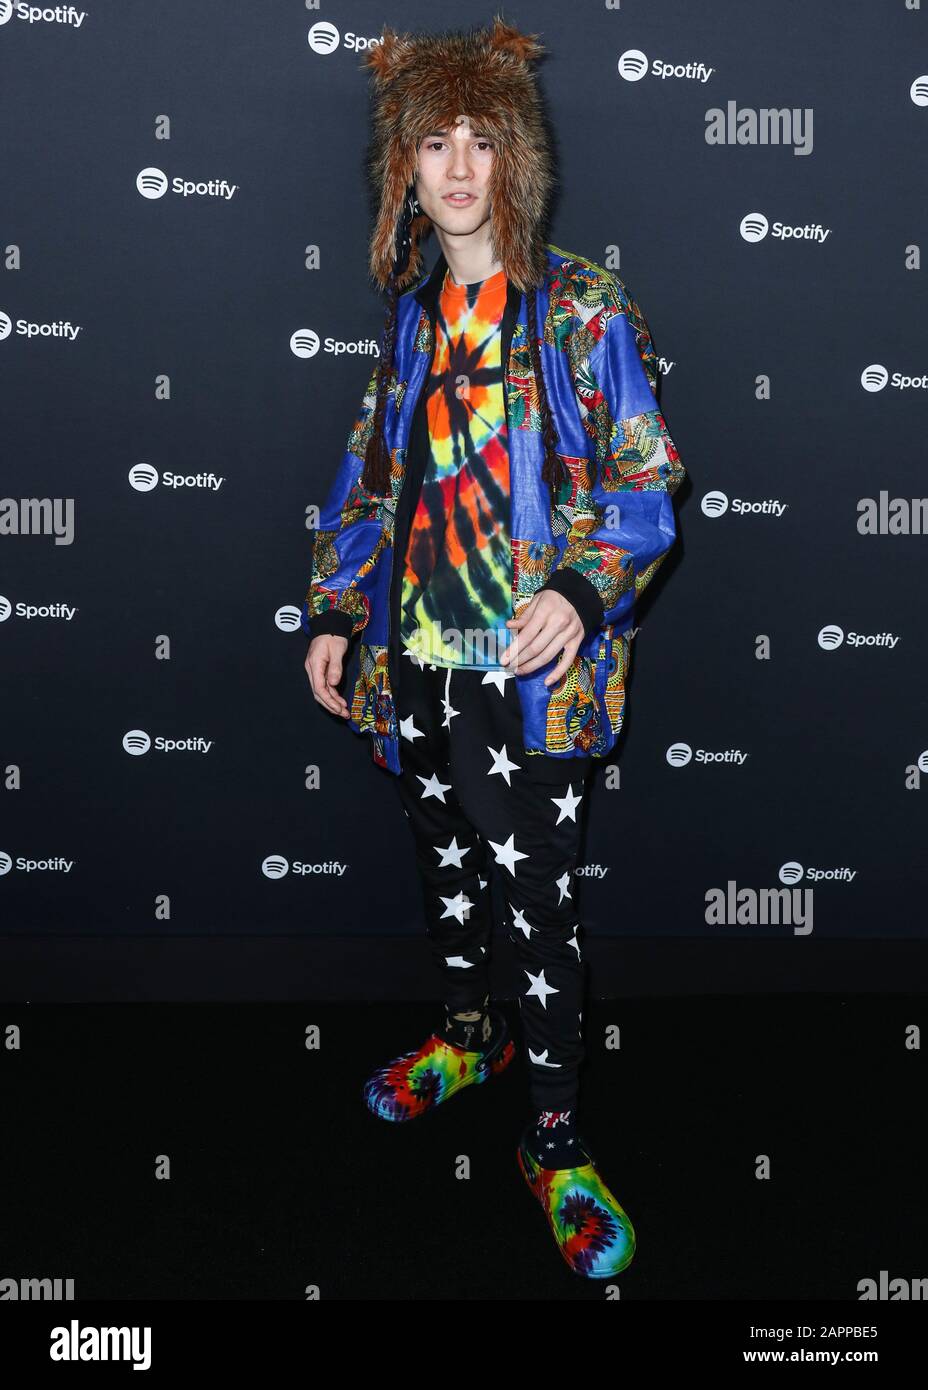 west-hollywood-los-angeles-california-usa-january-23-jacob-collier-arrives-at-the-spotify-best-new-artist-2020-party-held-at-the-lot-studios-on-january-23-2020-in-west-hollywood-los-angeles-california-united-states-photo-by-xavier-collinimage-press-agency-2APPBE5.jpg